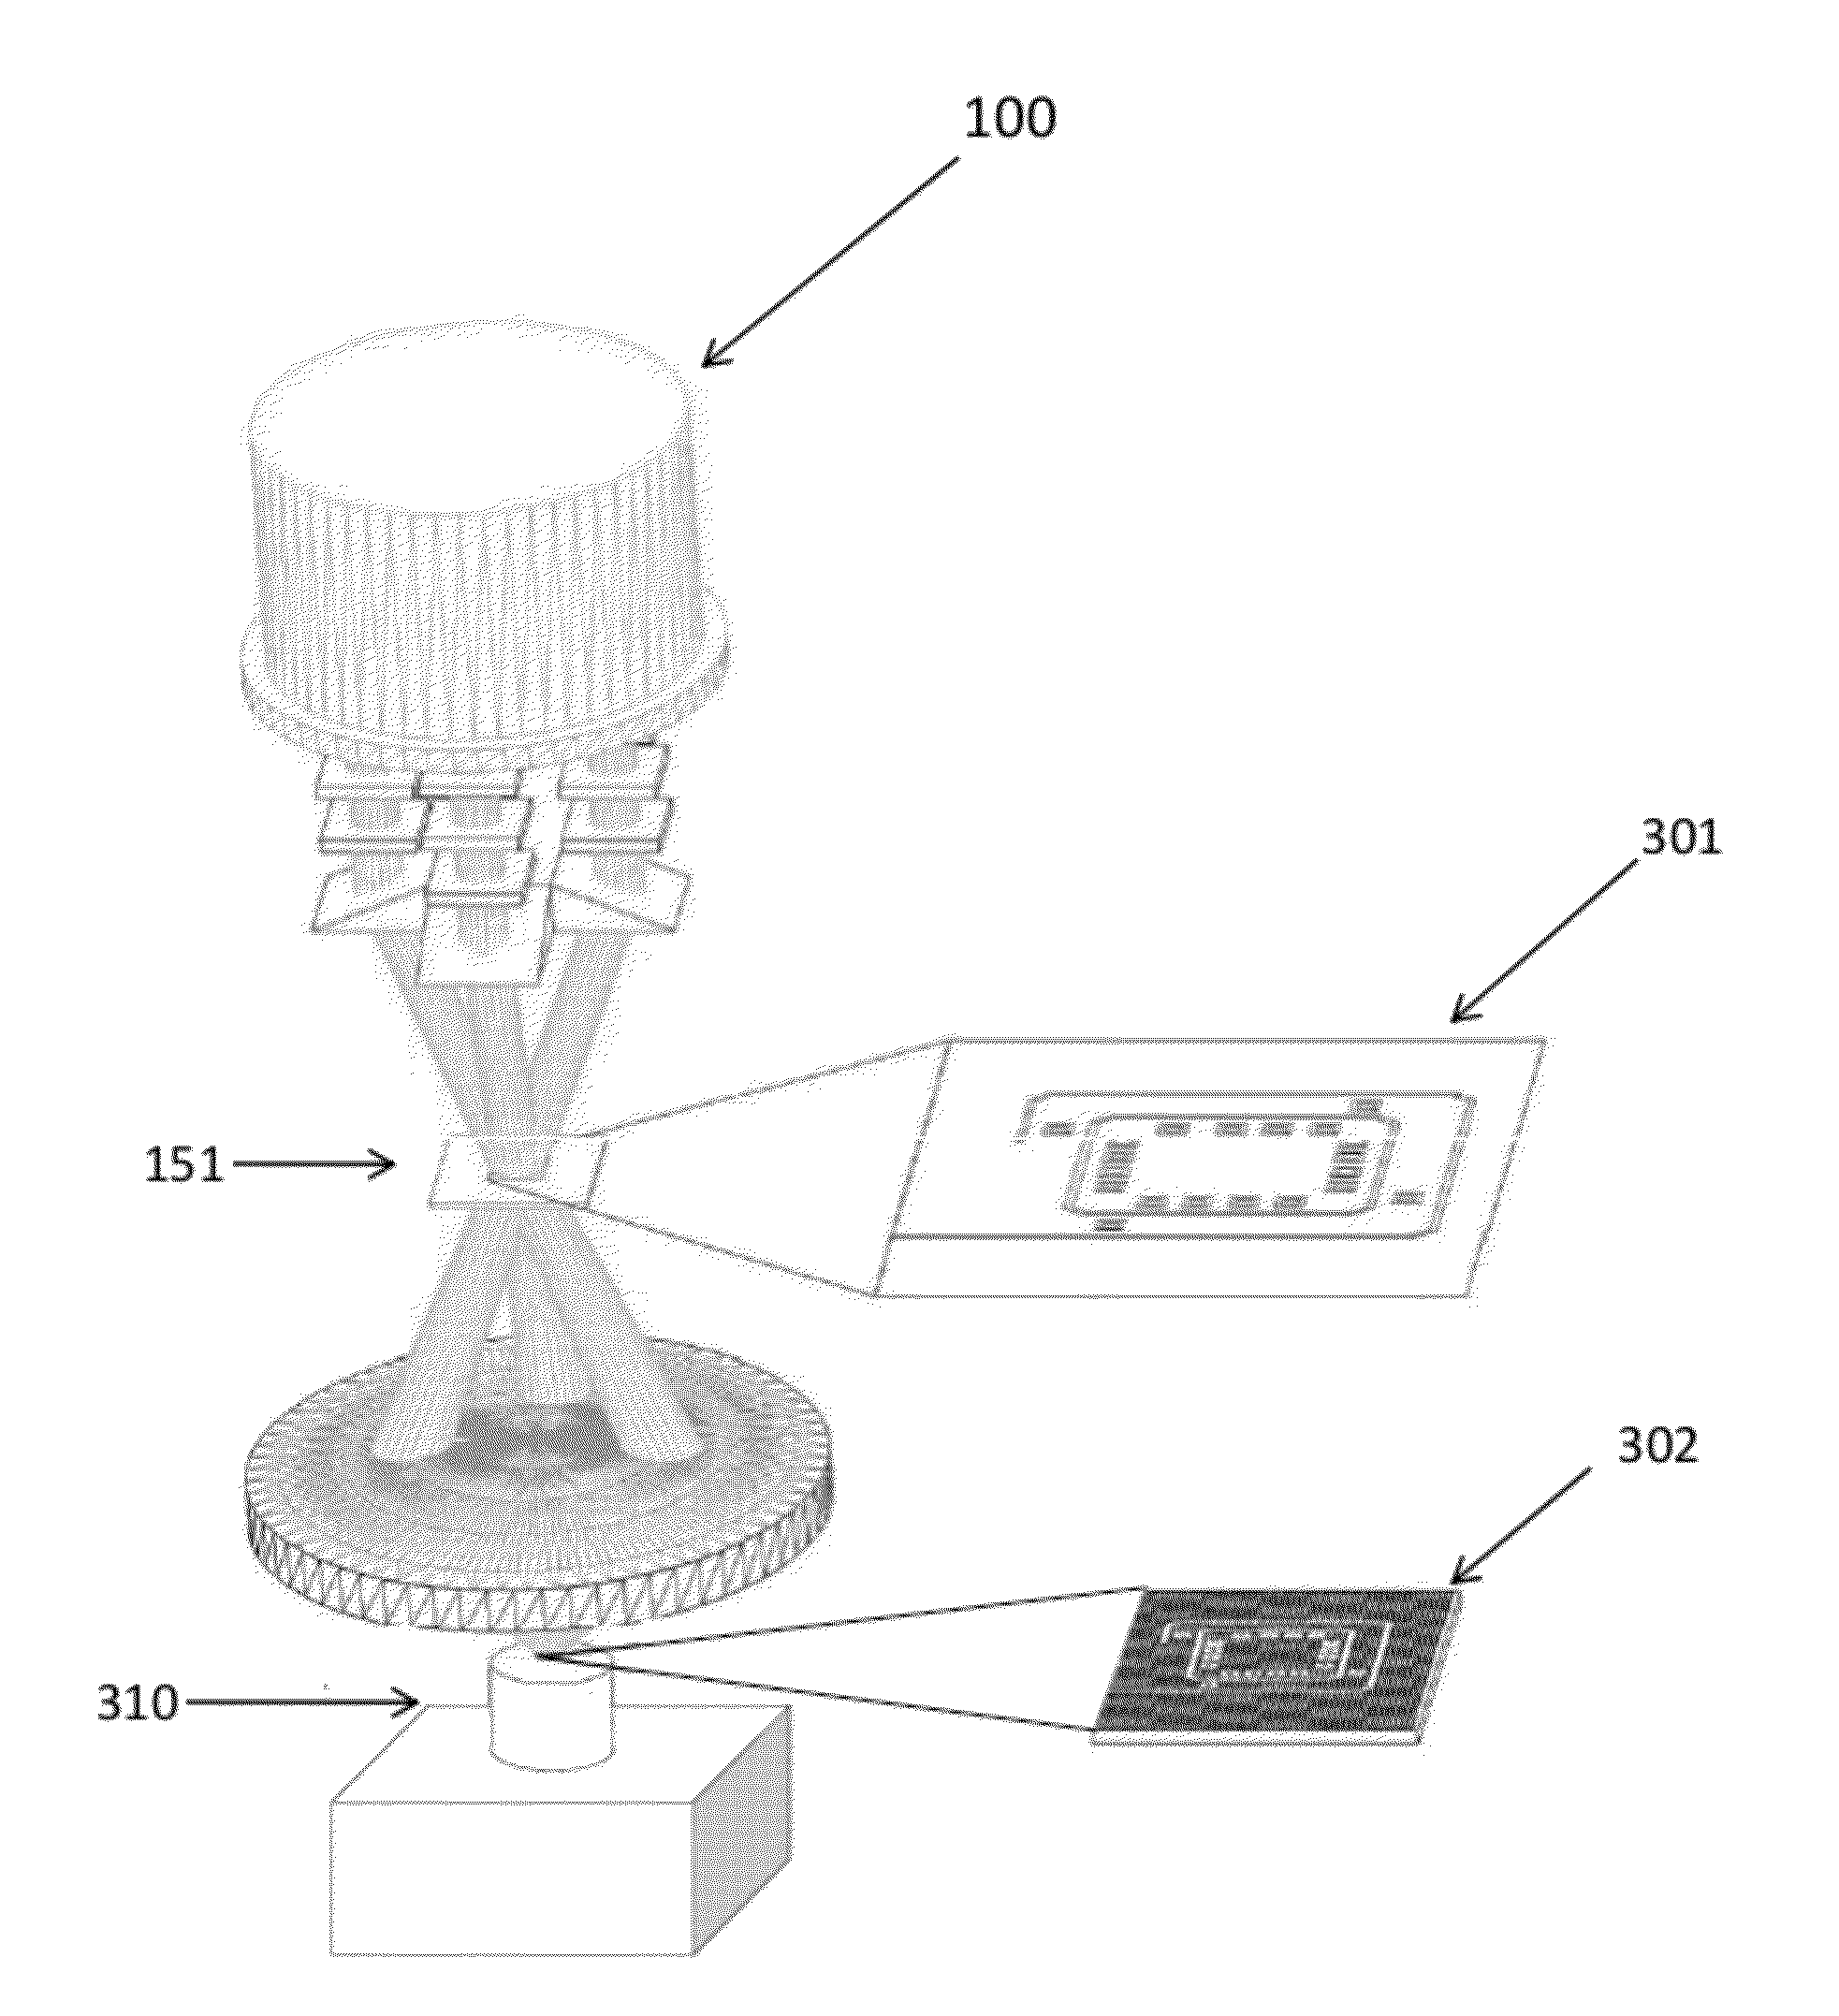 Interference projection exposure system and method of using same